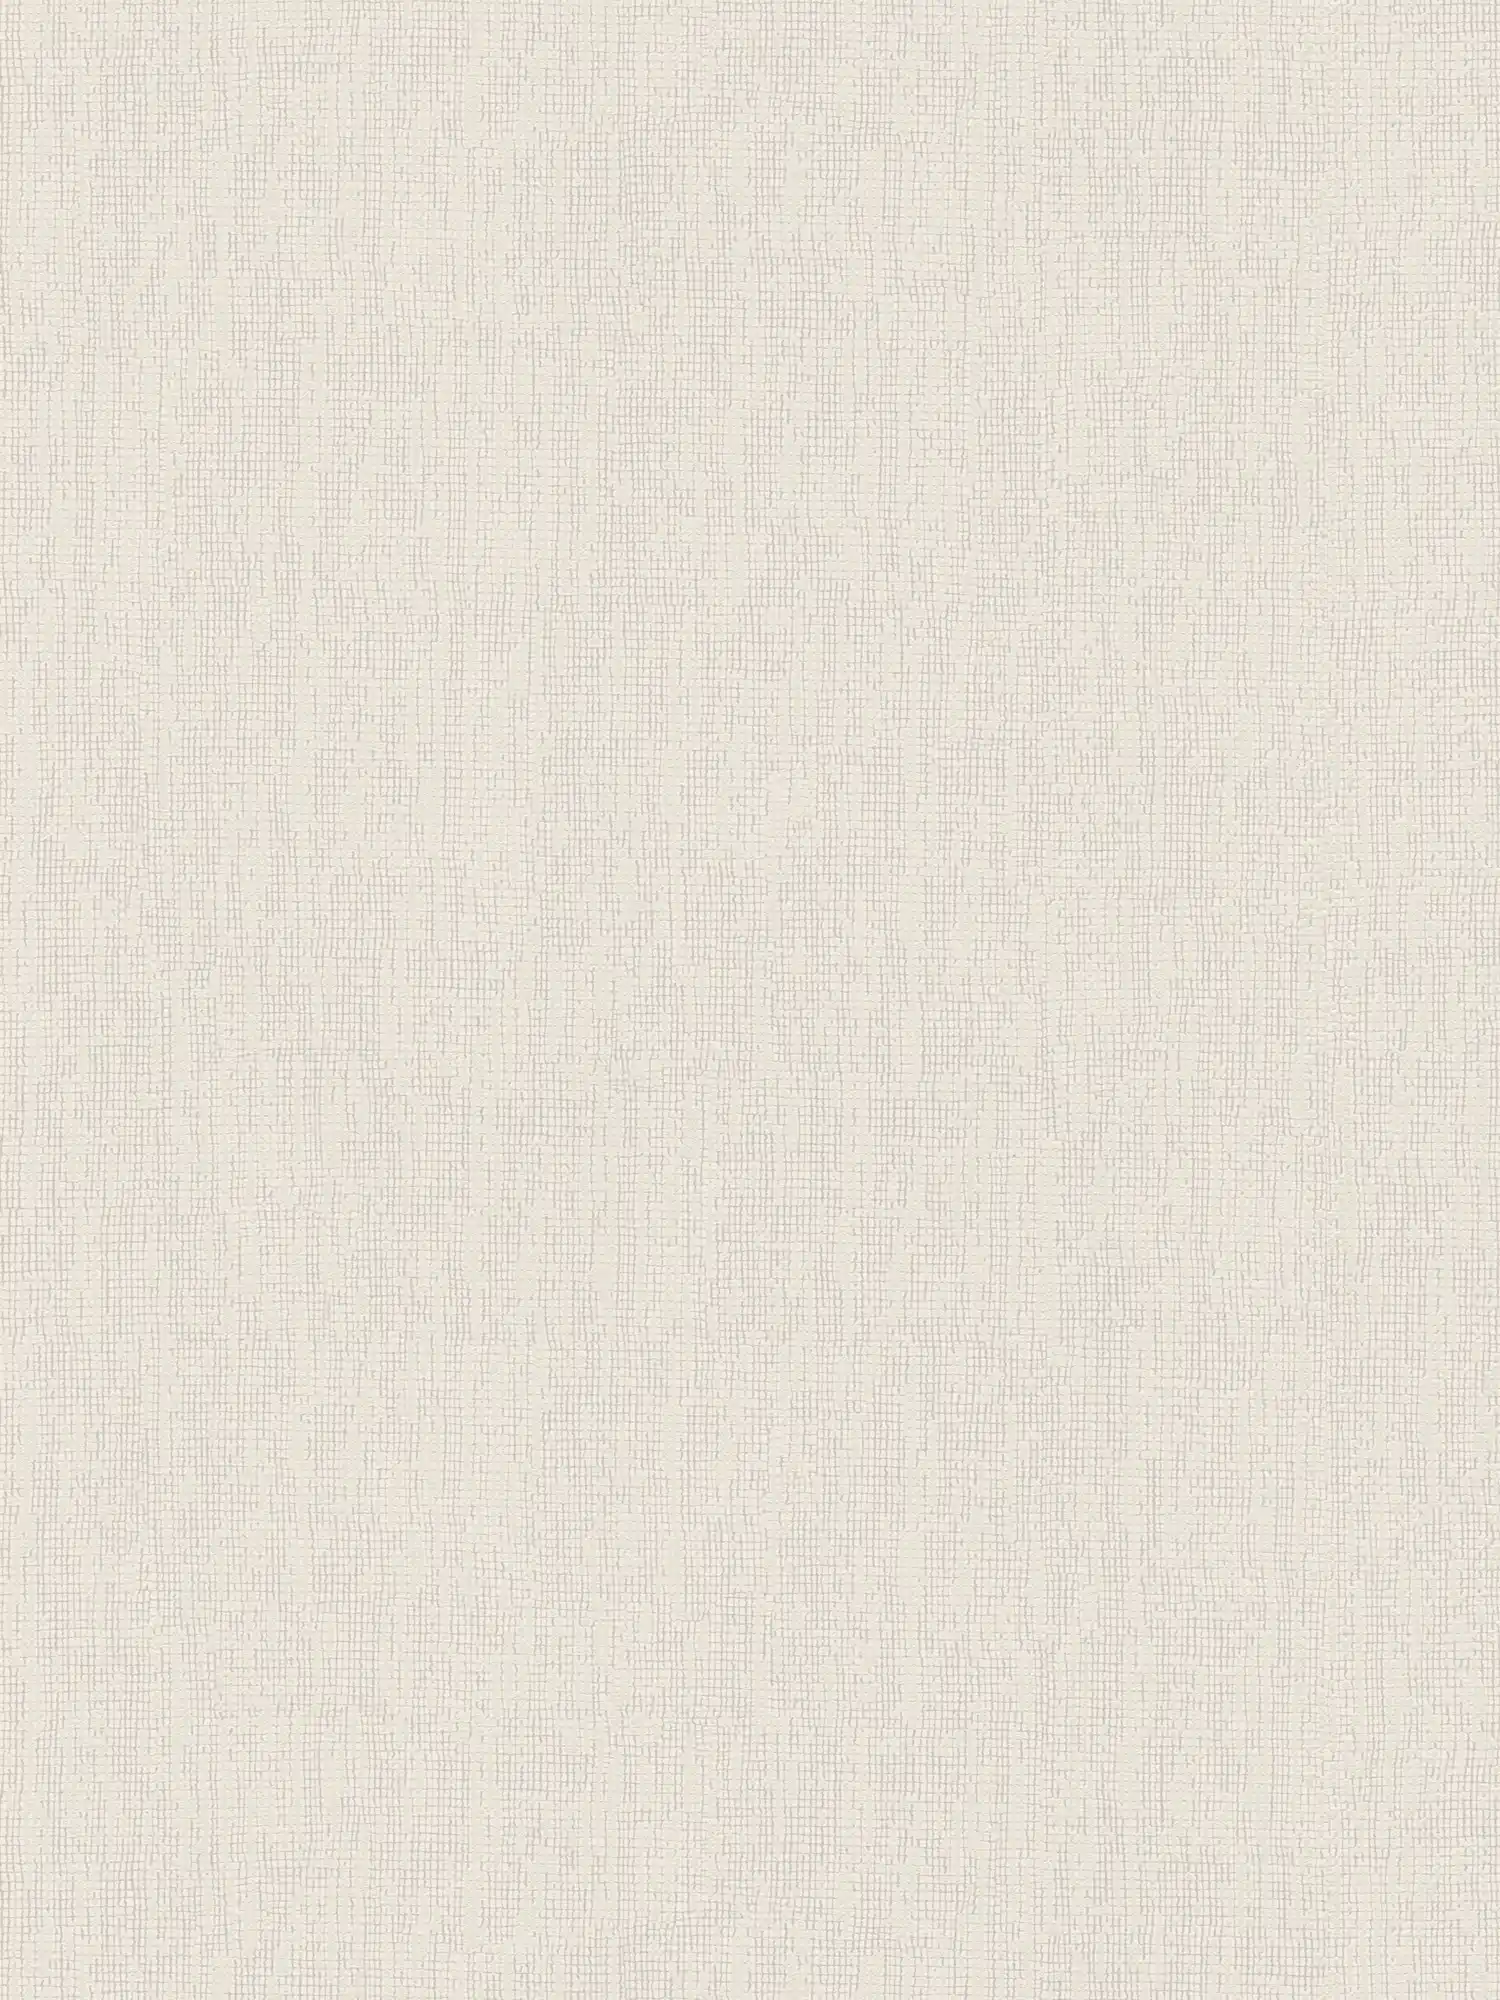 Wallpaper plain with structure details in Scandi style - cream
